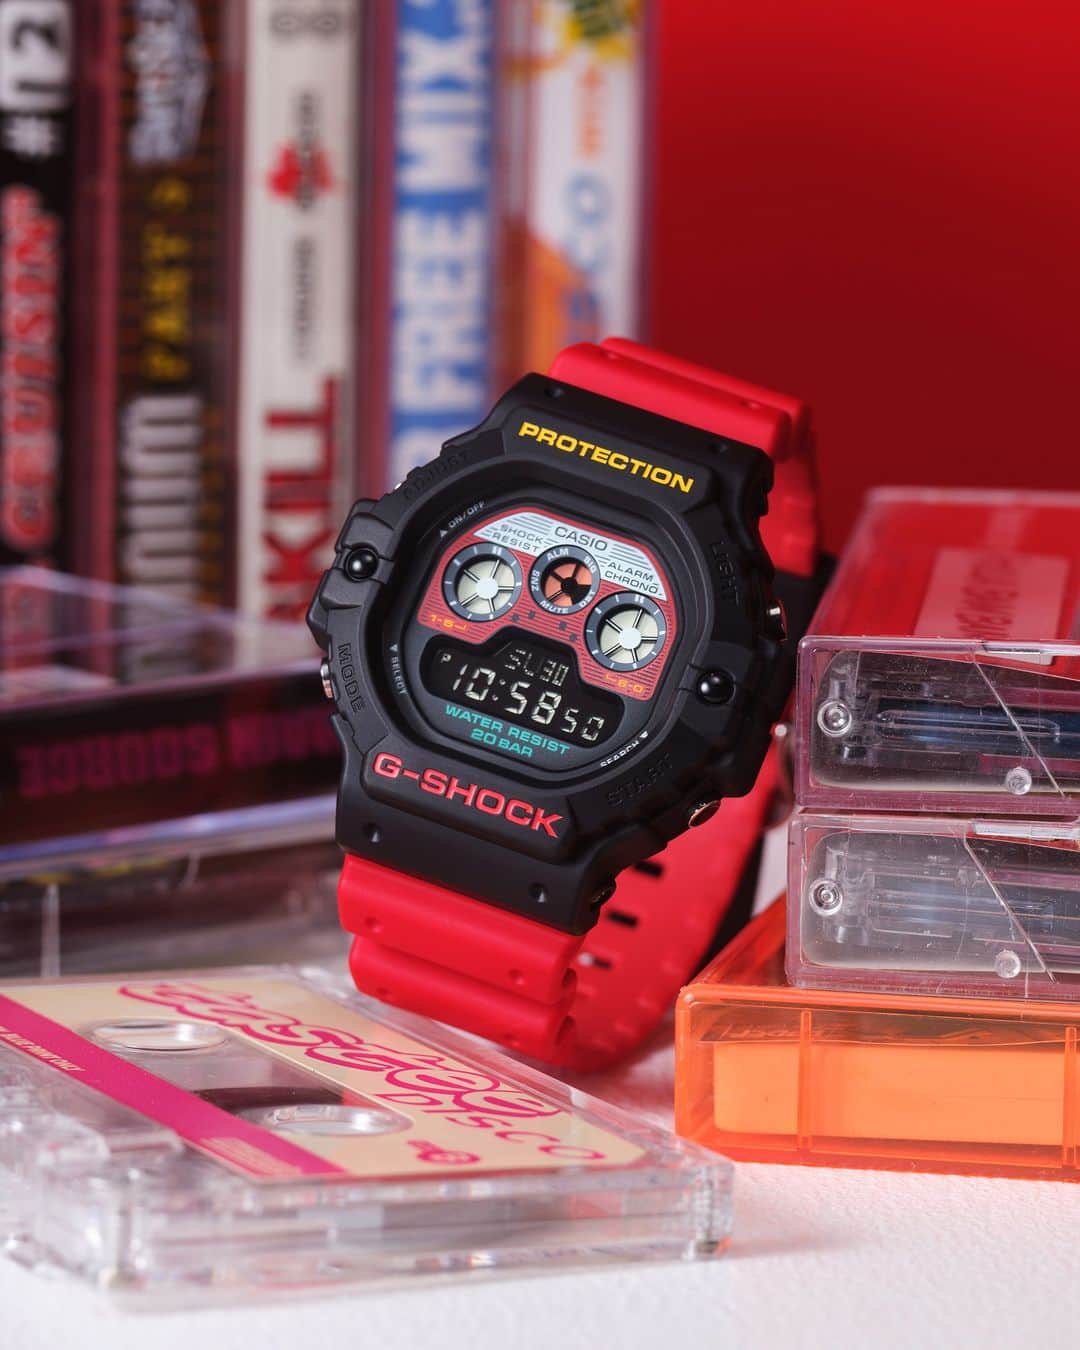 G-SHOCKのインスタグラム：「MIX TAPE  ビビッドなレッドが目を引くクラシカルなデザインが、世代を超えて「今っぽさ」に。手元を鮮やかに彩るNewモデル。  A classic face with an eye-catching vivid red color became up-to-date design across generations. New model that brightens up your wrist.  DW-5900MT-1A4JF  #g_shock #mixtape #dw5900 #90s #80s #腕時計コーデ」